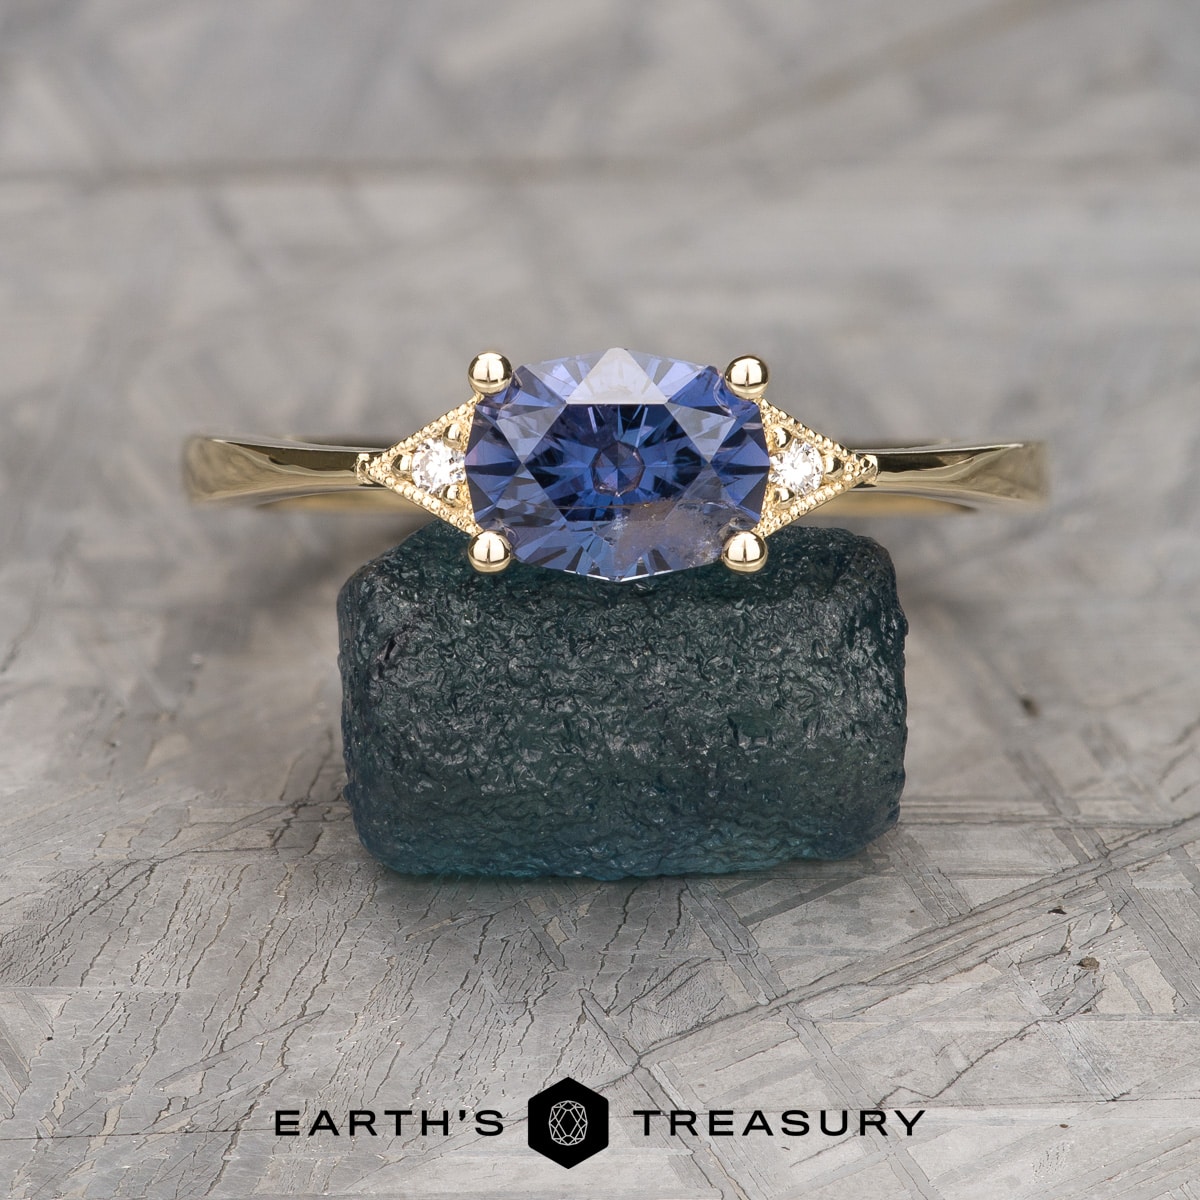 The "Niamh" in 14k yellow gold with 1.62-carat Umba sapphire